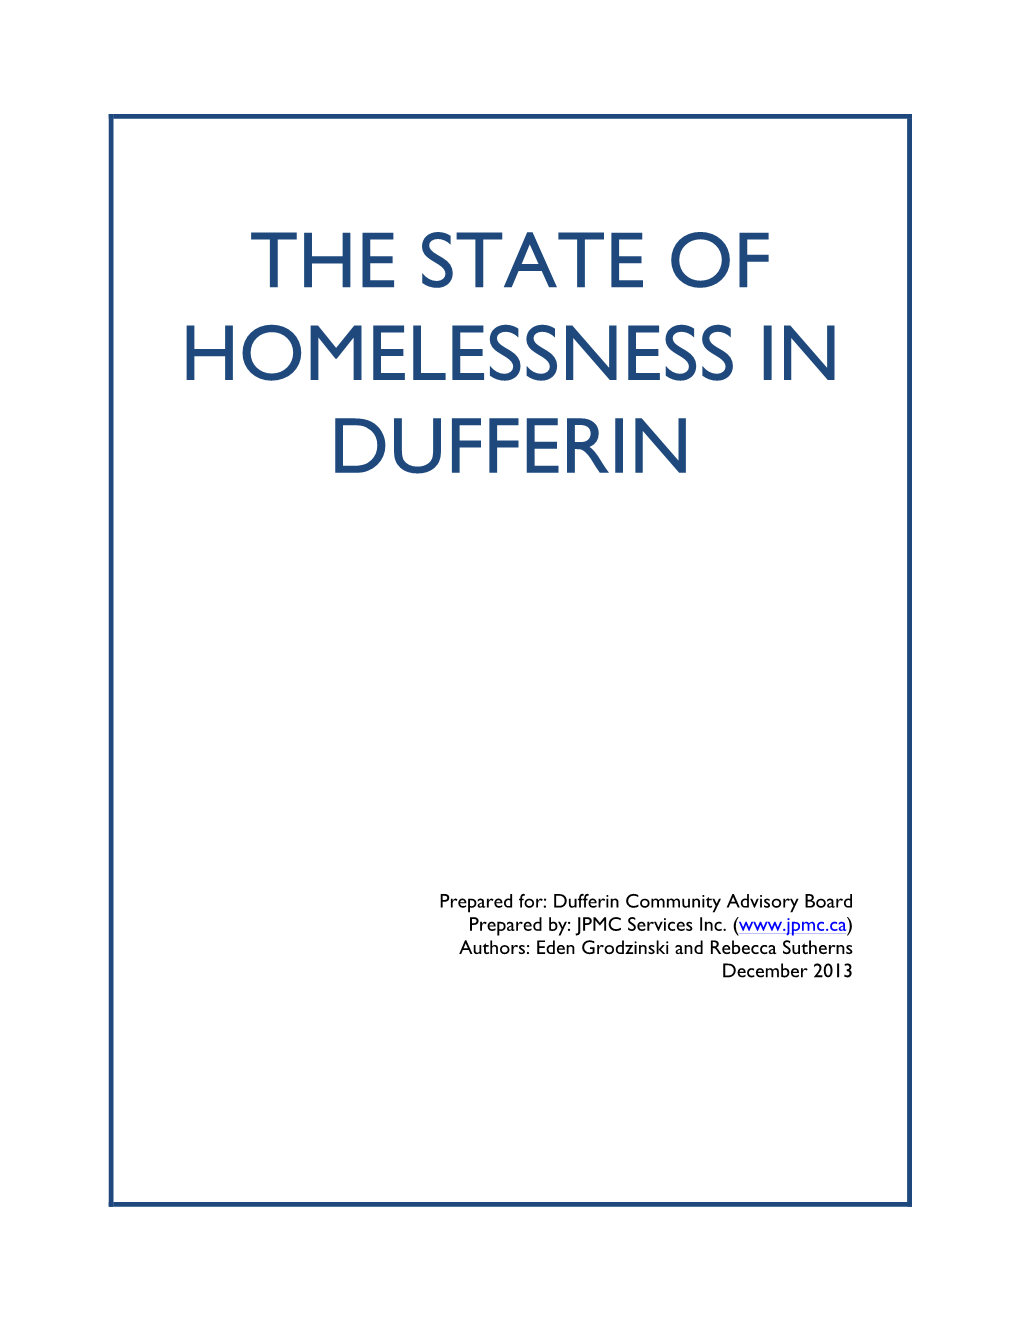 The State of Homelessness in Dufferin